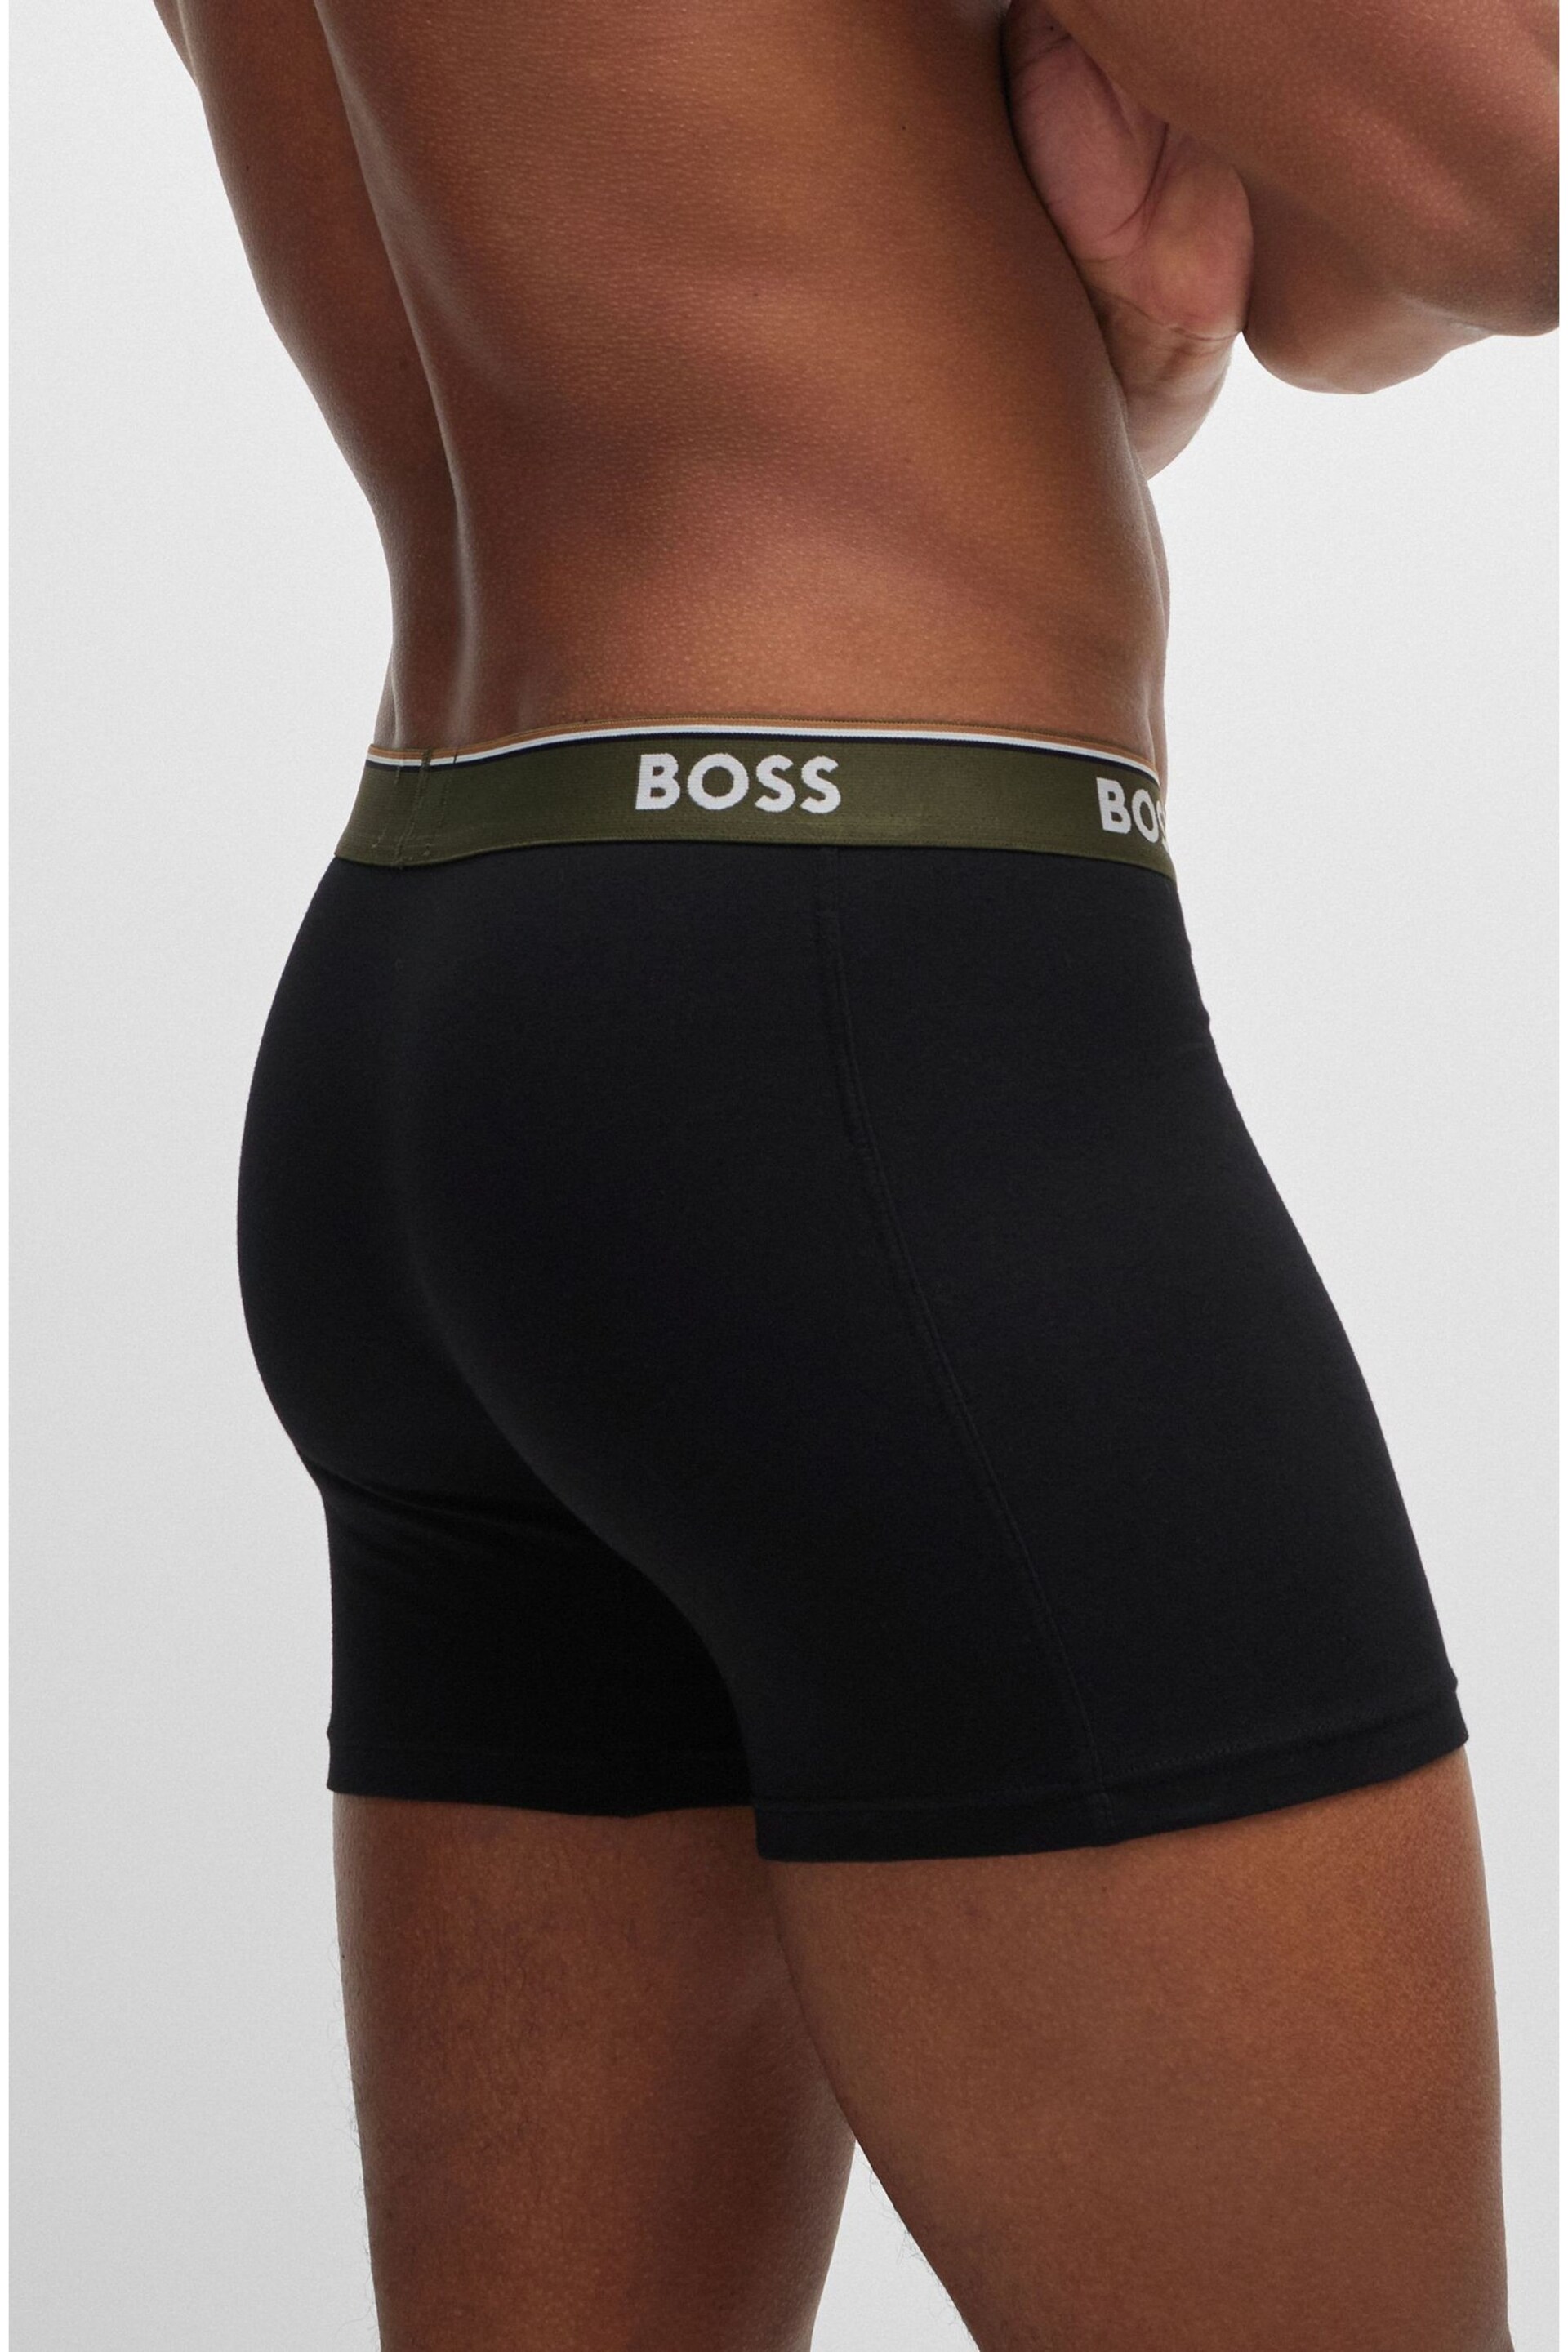 BOSS Black of Stretch-Cotton Boxer Briefs 3 Pack With Logos - Image 10 of 10